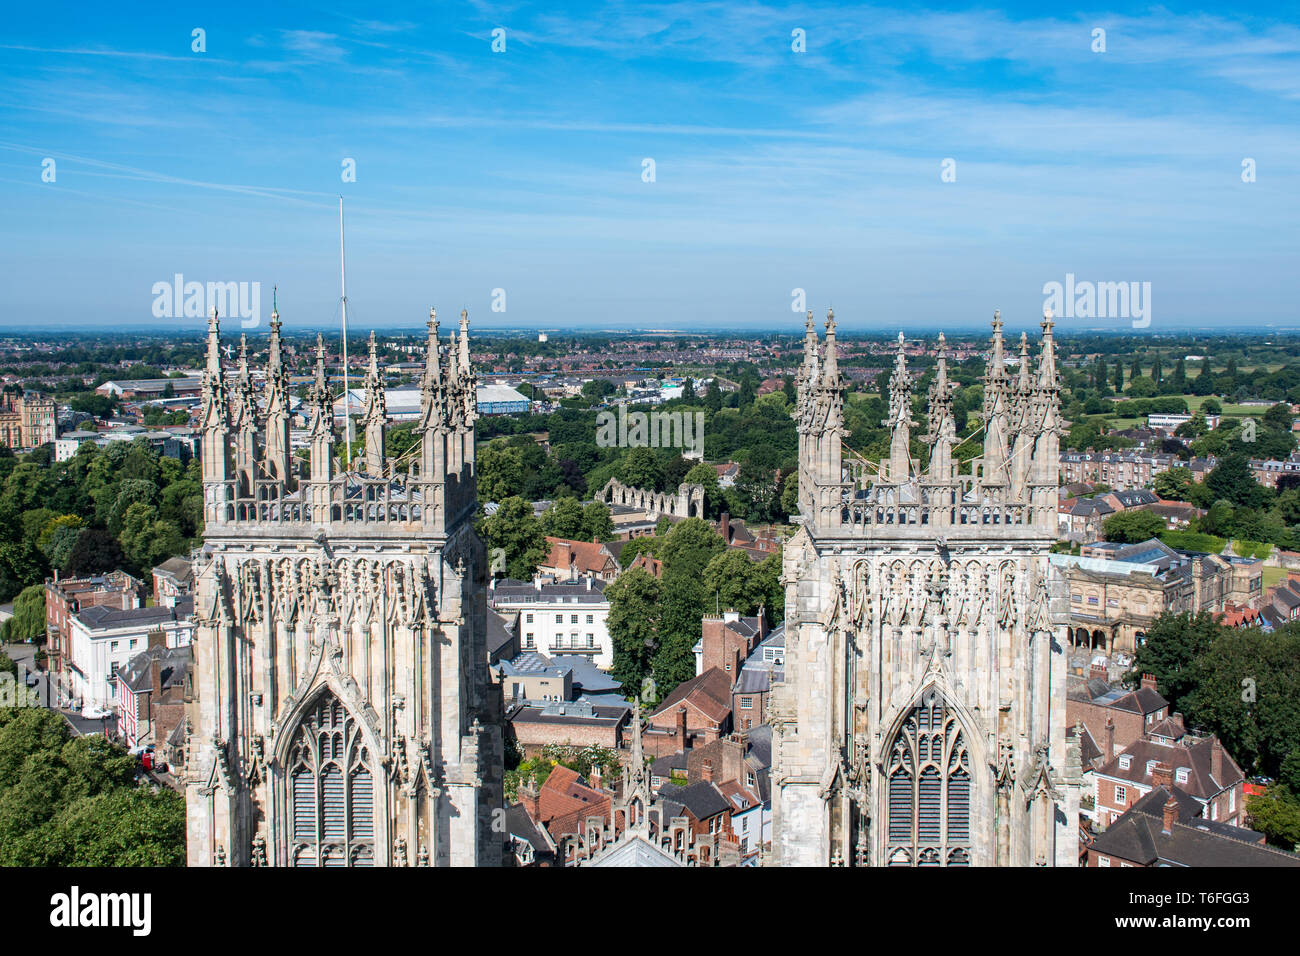 View of Towers of York Minster Uk Stock Photo